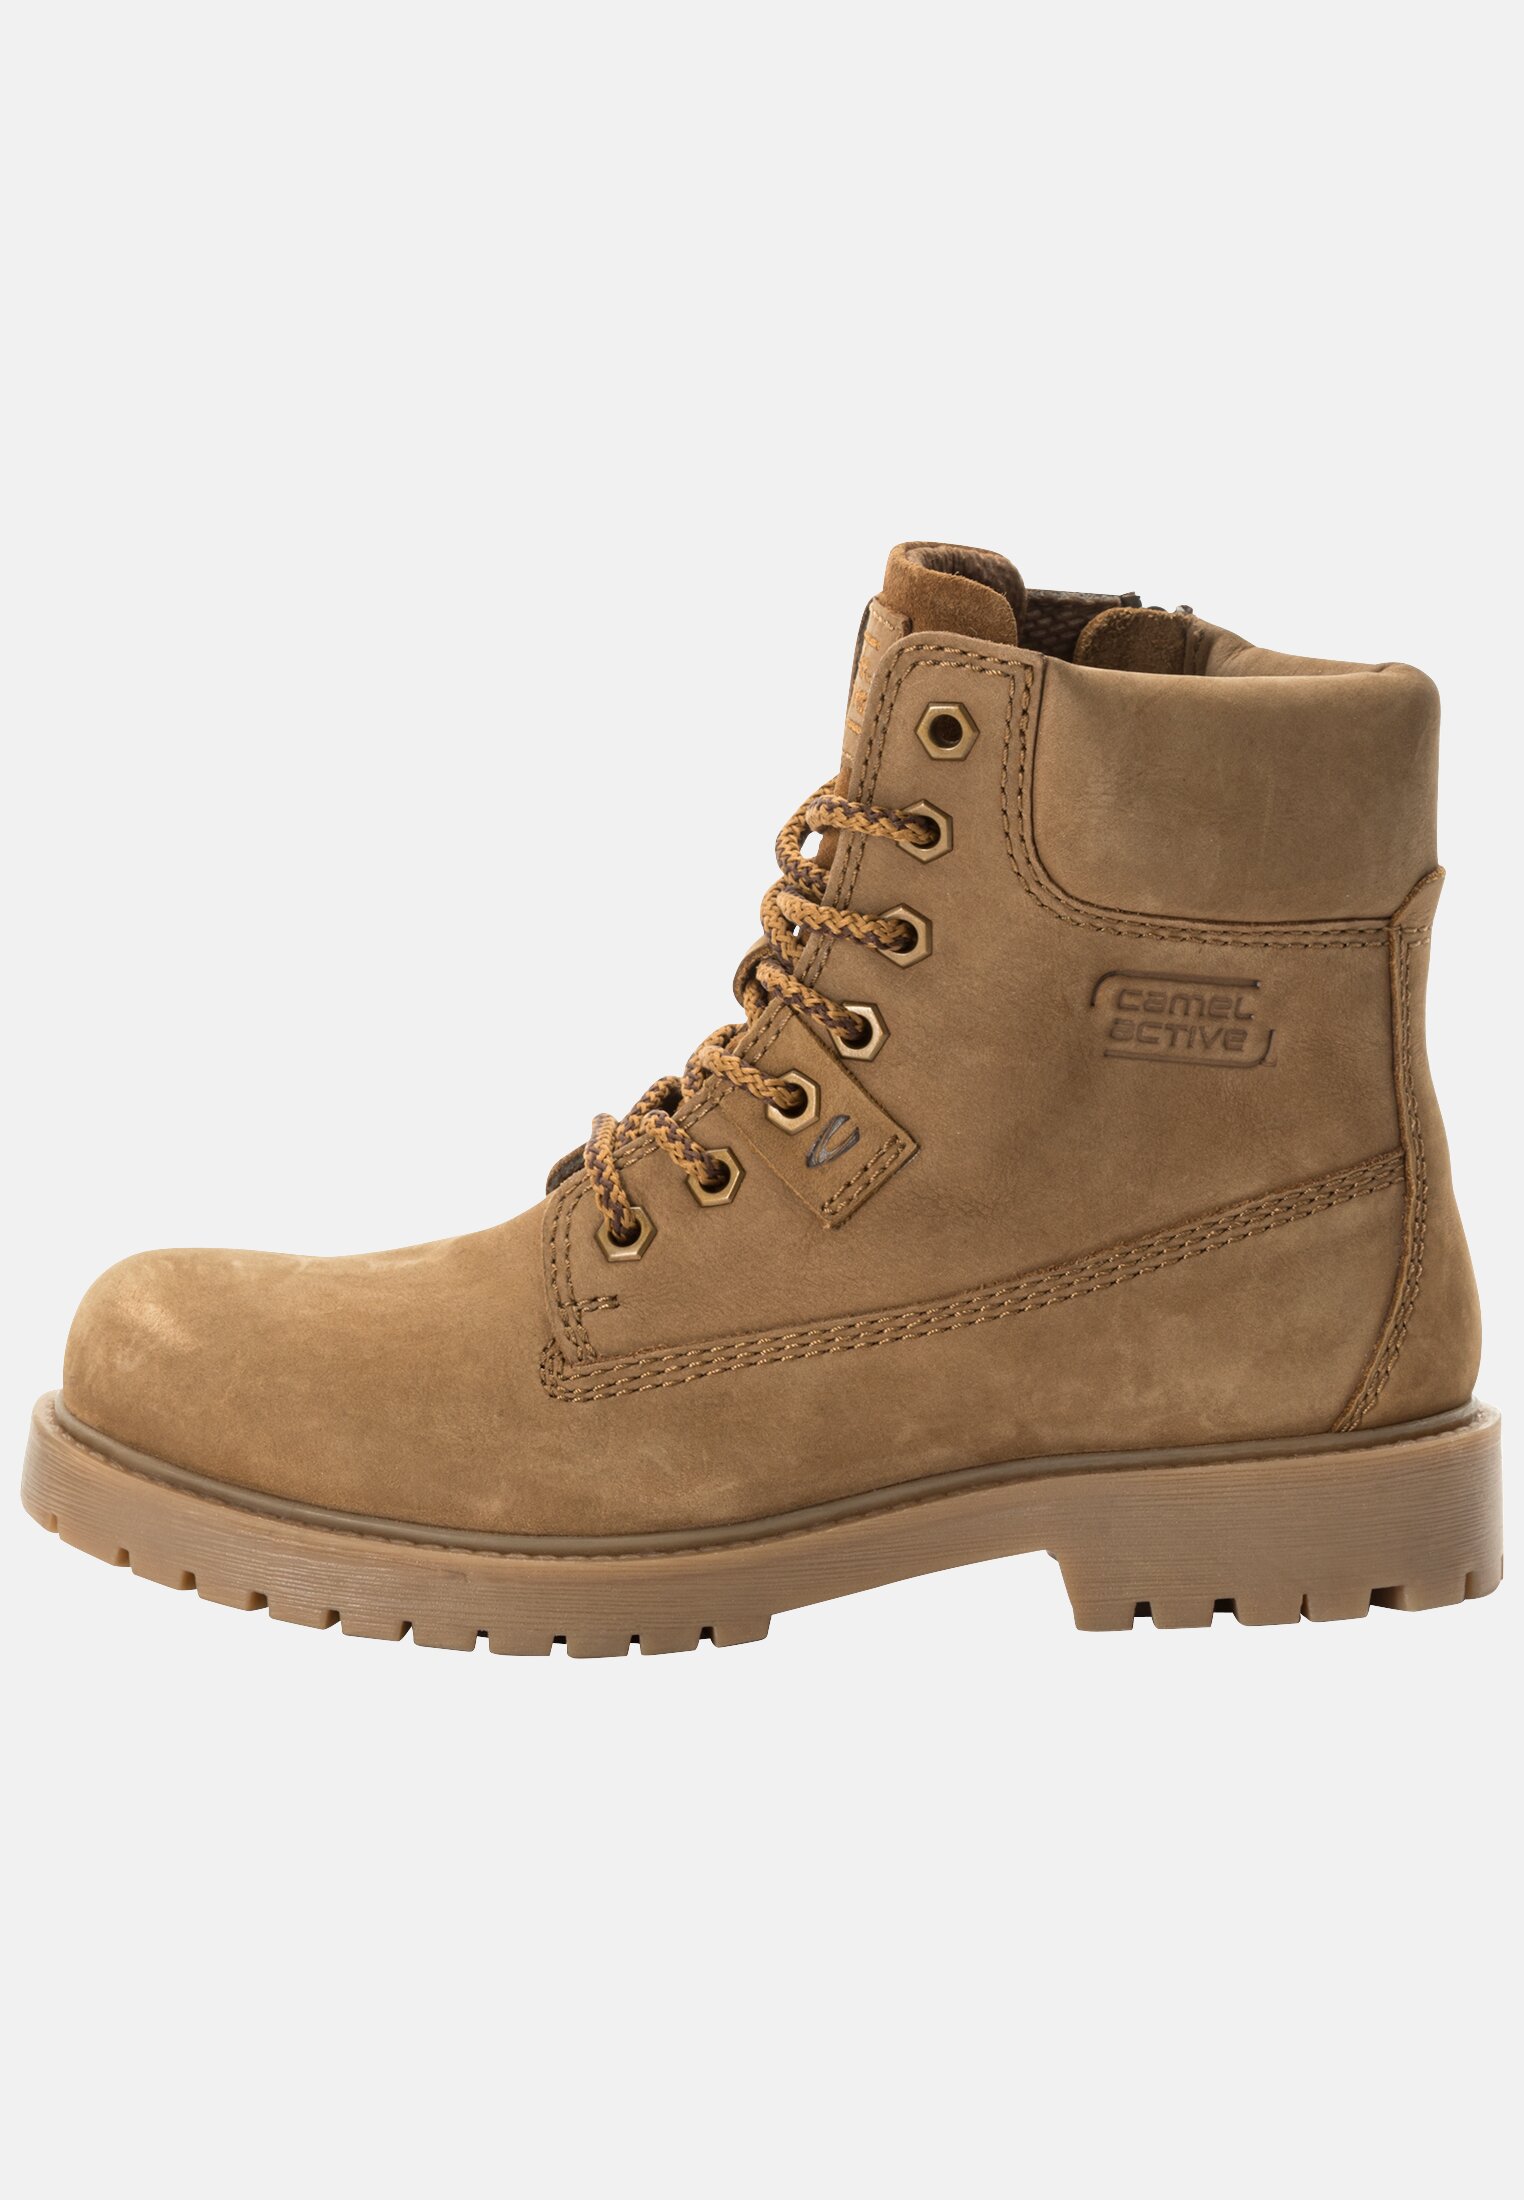 Camel Active Lace-up boot made of genuine leather